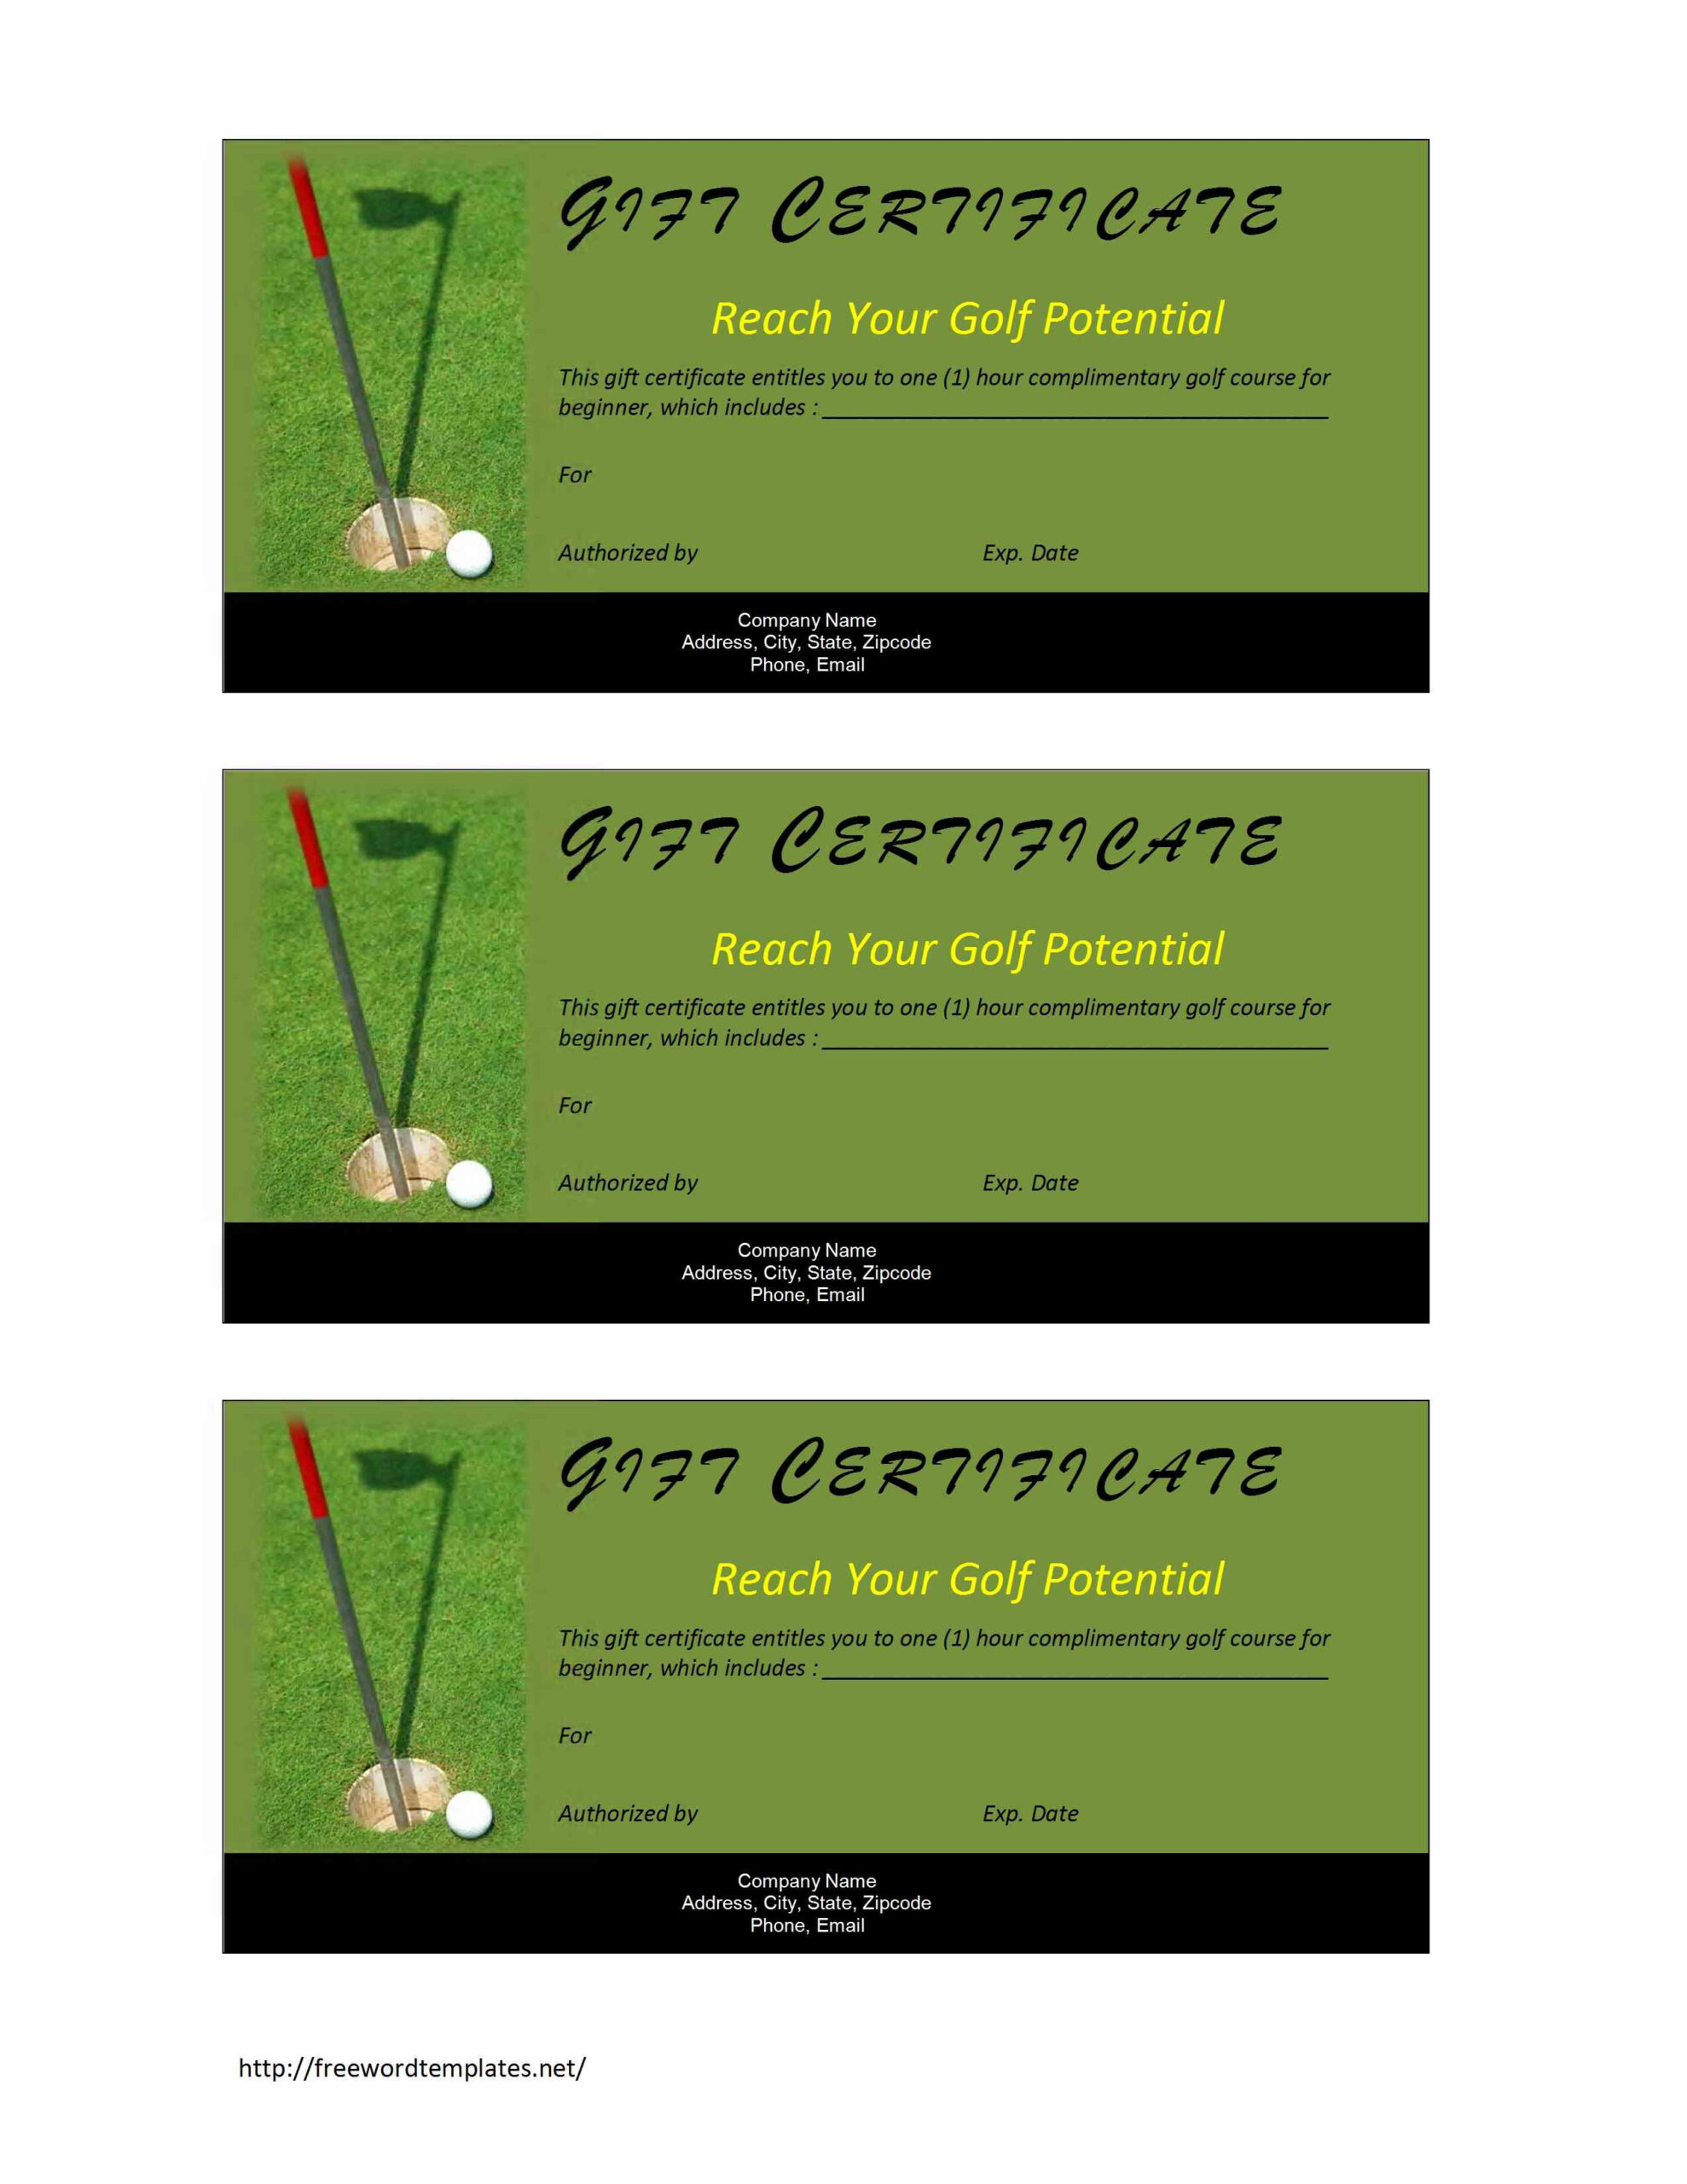 Golf Course Gift Certificate Template Free | Resume Writing Pertaining To Golf Gift Certificate Template